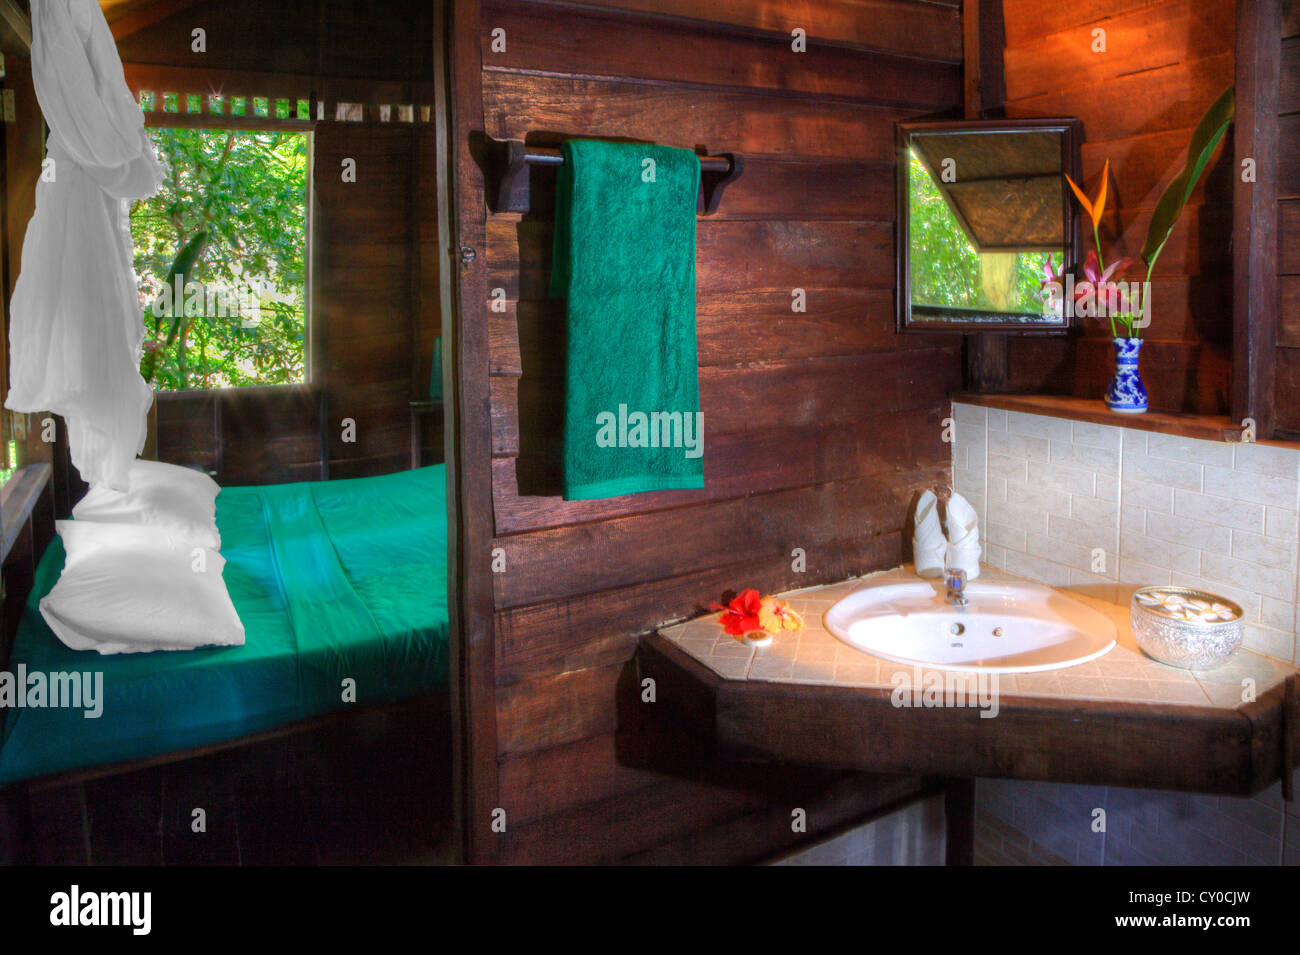 A bathroom in one of the TREE HOUSES at OUR JUNGLE HOUSE a lodge near KHAO SOK NATIONAL PARK - SURATHANI PROVENCE, THAILAND Stock Photo